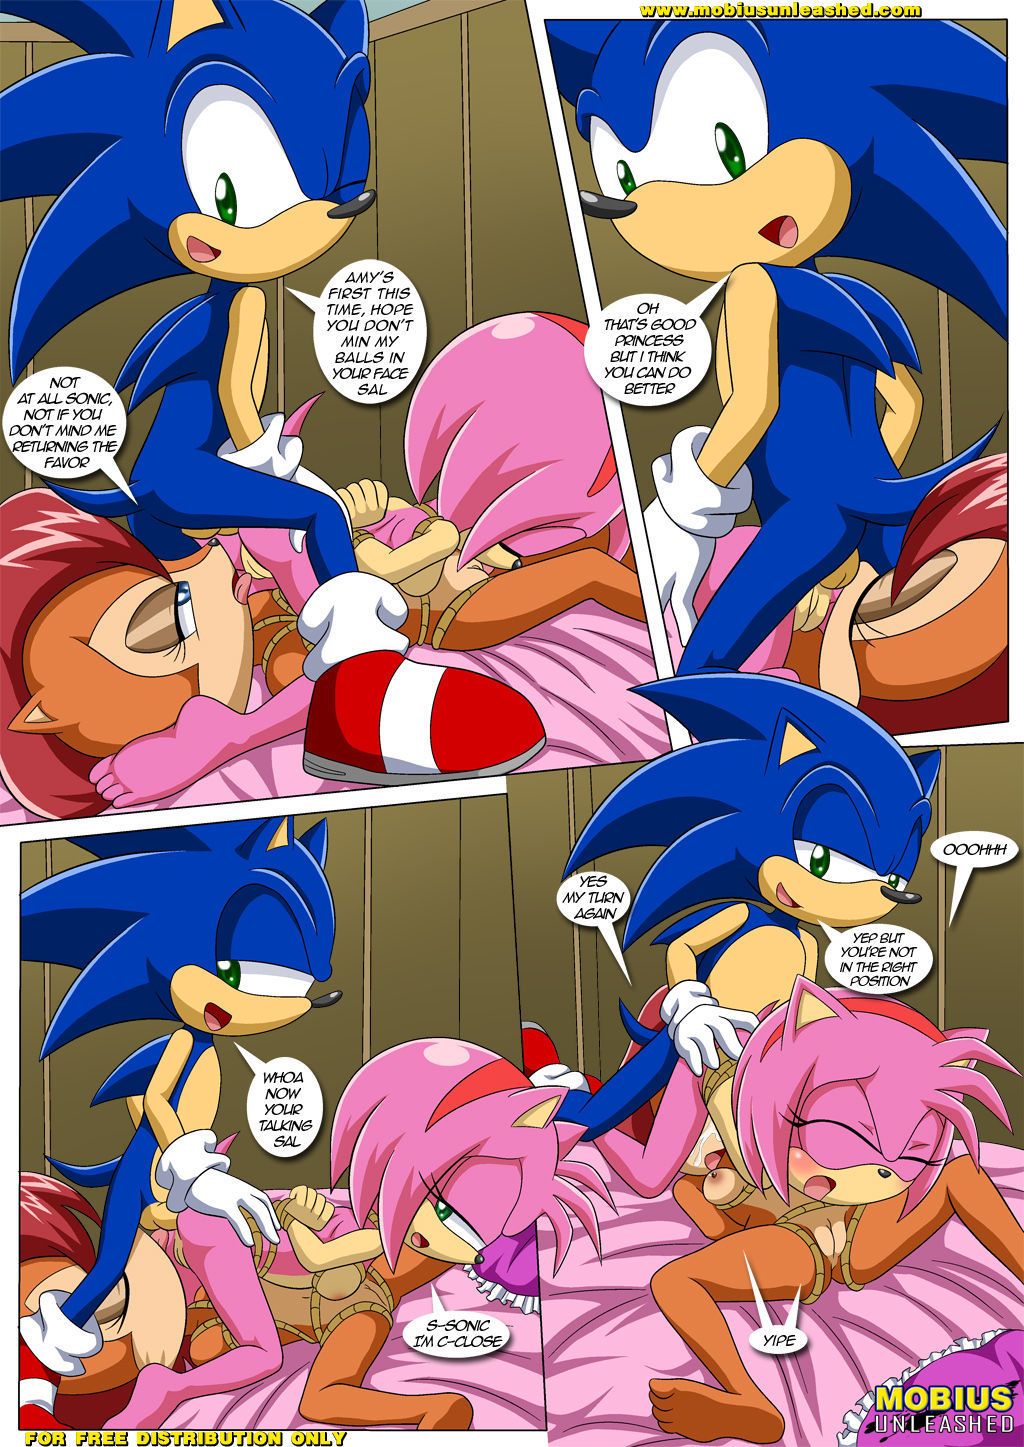 Palcomix (bbmbbf) The Heat of Passion (Sonic The Hedgehog) - part 2